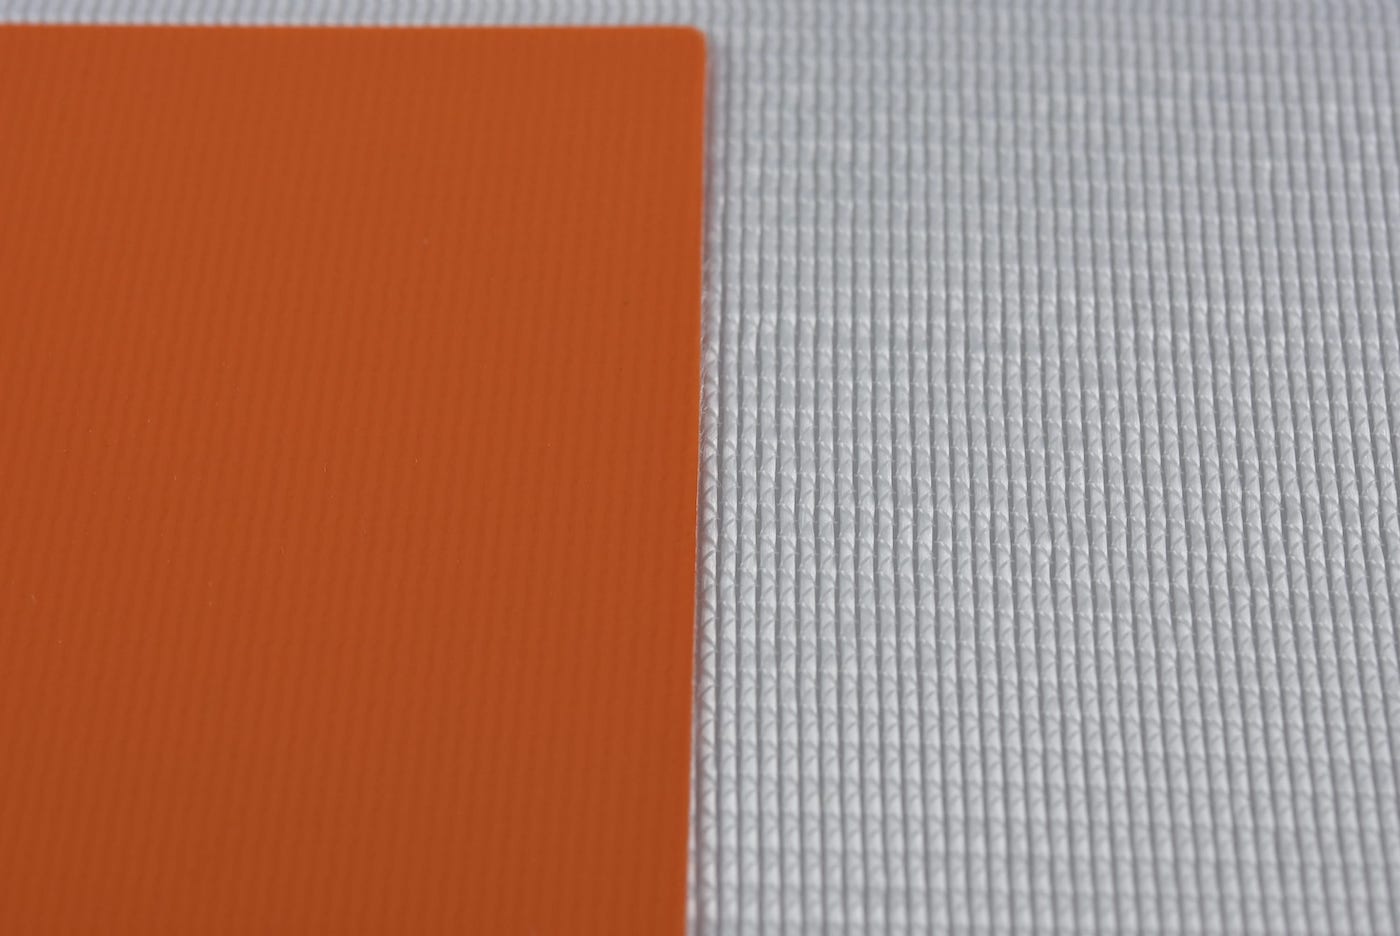 Coated warp knitted fabric for roofing. © Karl Mayer